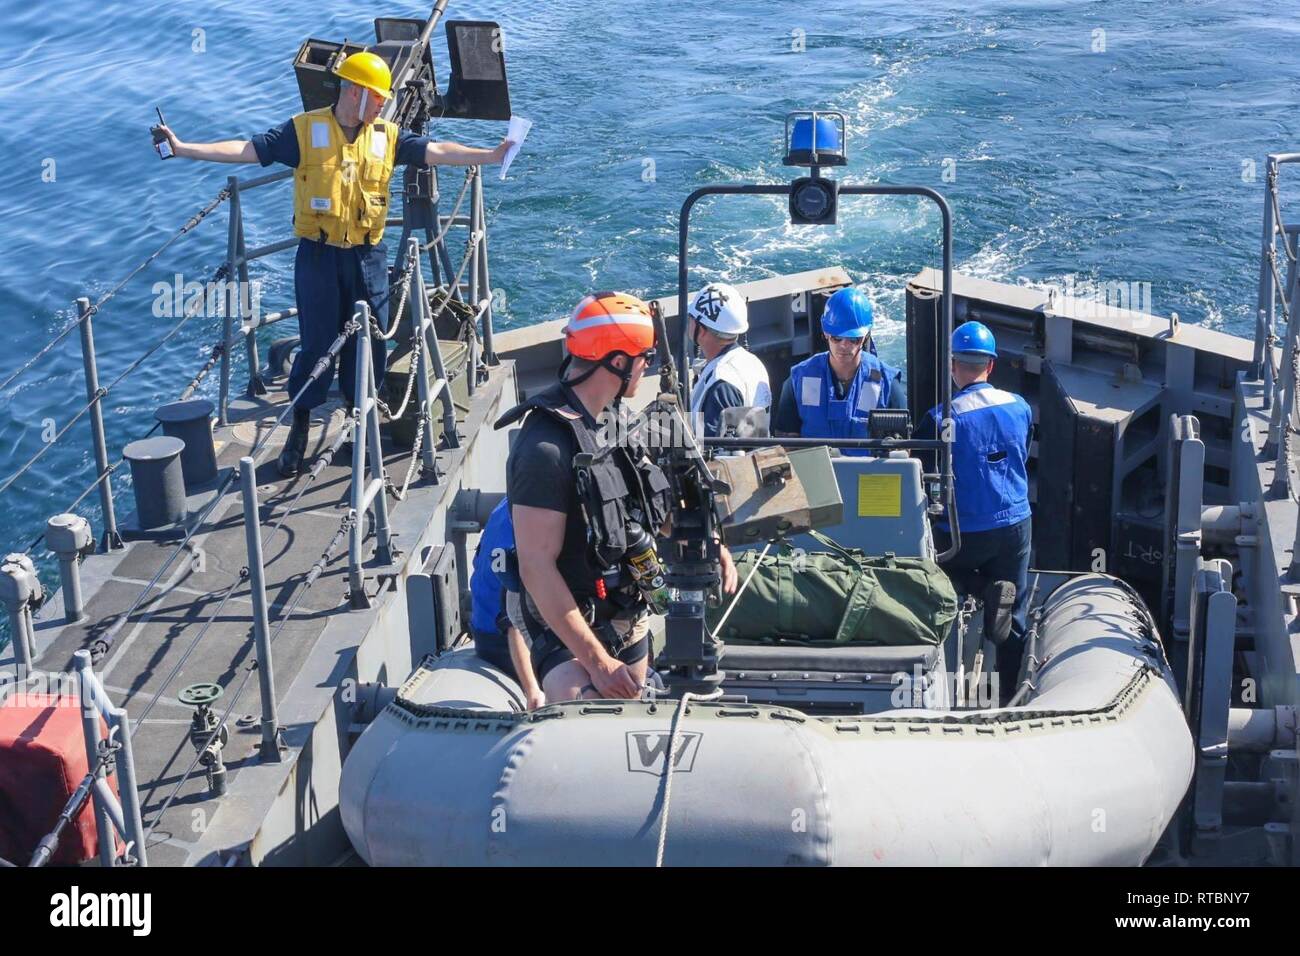 ARABIAN GULF (Feb. 9, 2019) Chief Boatswain's Mate Luichy Victorianoabrej, left, directs a rigid-hull inflatable boat exercise aboard the Cyclone-class coastal patrol ship USS Thunderbolt (PC 12). Thunderbolt is forward deployed to the U.S. 5th Fleet area of operations in support of naval operations to ensure maritime stability and security in the Central region, connecting the Mediterranean and the Pacific through the western Indian Ocean and three strategic choke points. Stock Photo